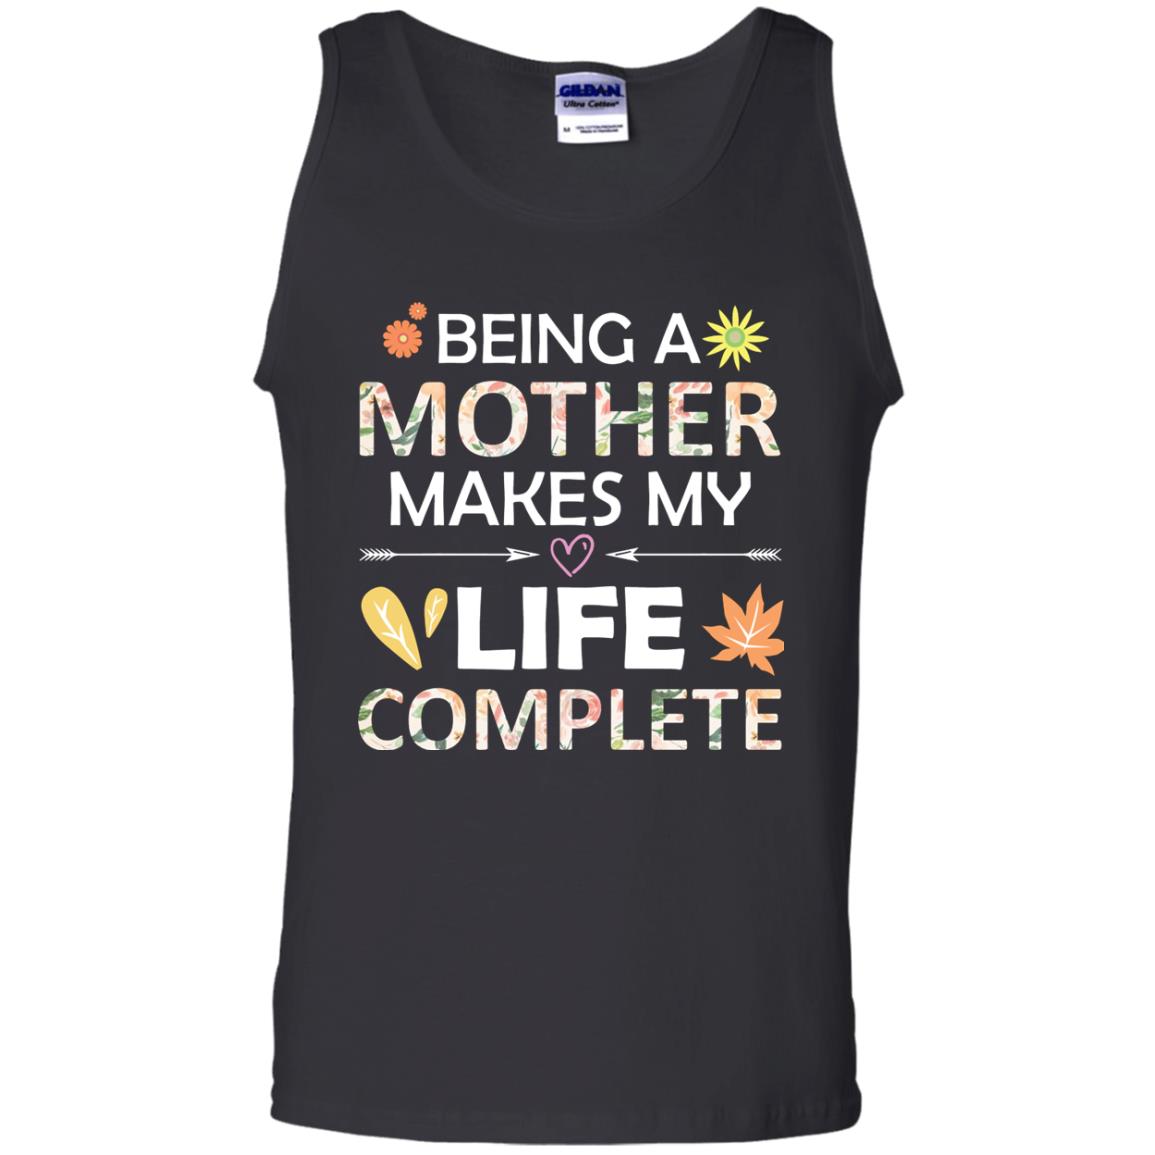 Being A Mother Make My Life Complete Parent_s Day Shirt For MommyG220 Gildan 100% Cotton Tank Top